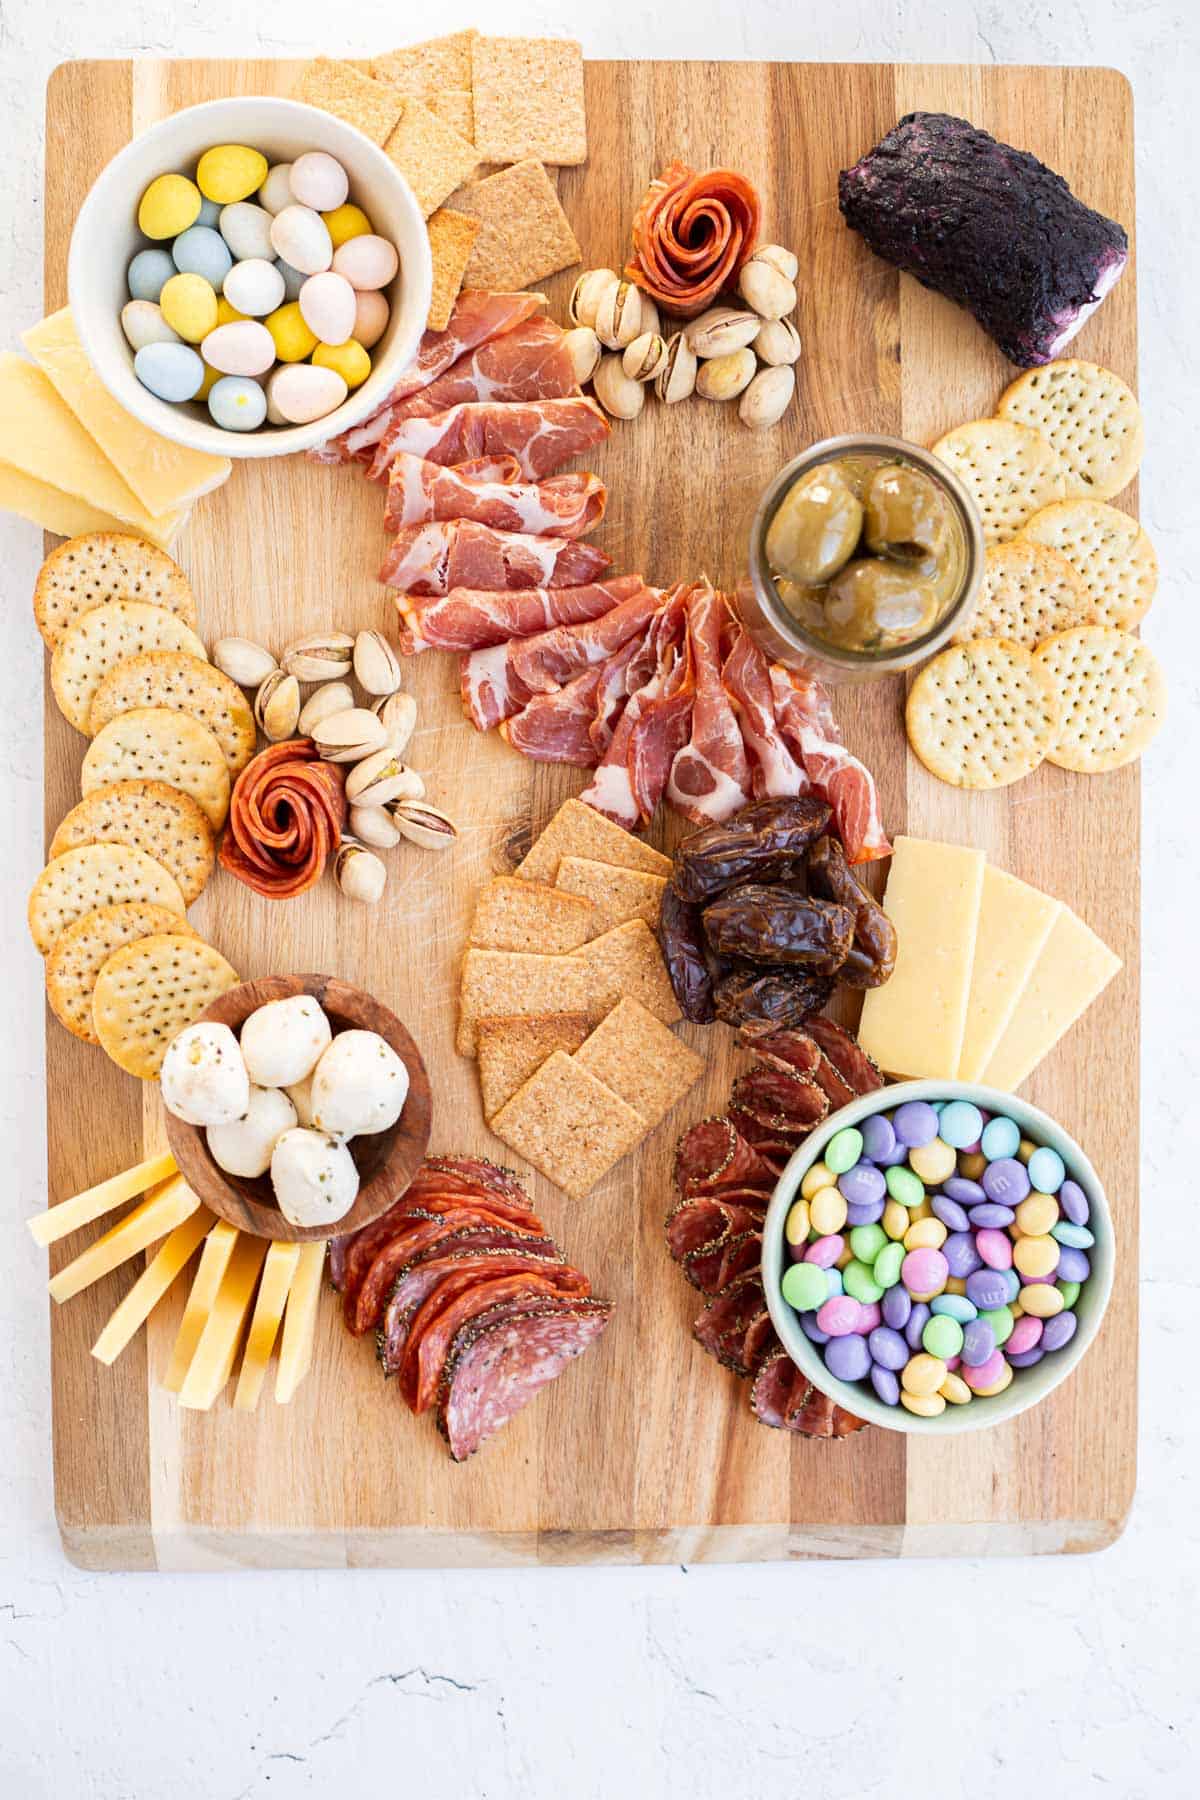 crackers, dry goods, meats, and cheeses to make a charcuterie board.